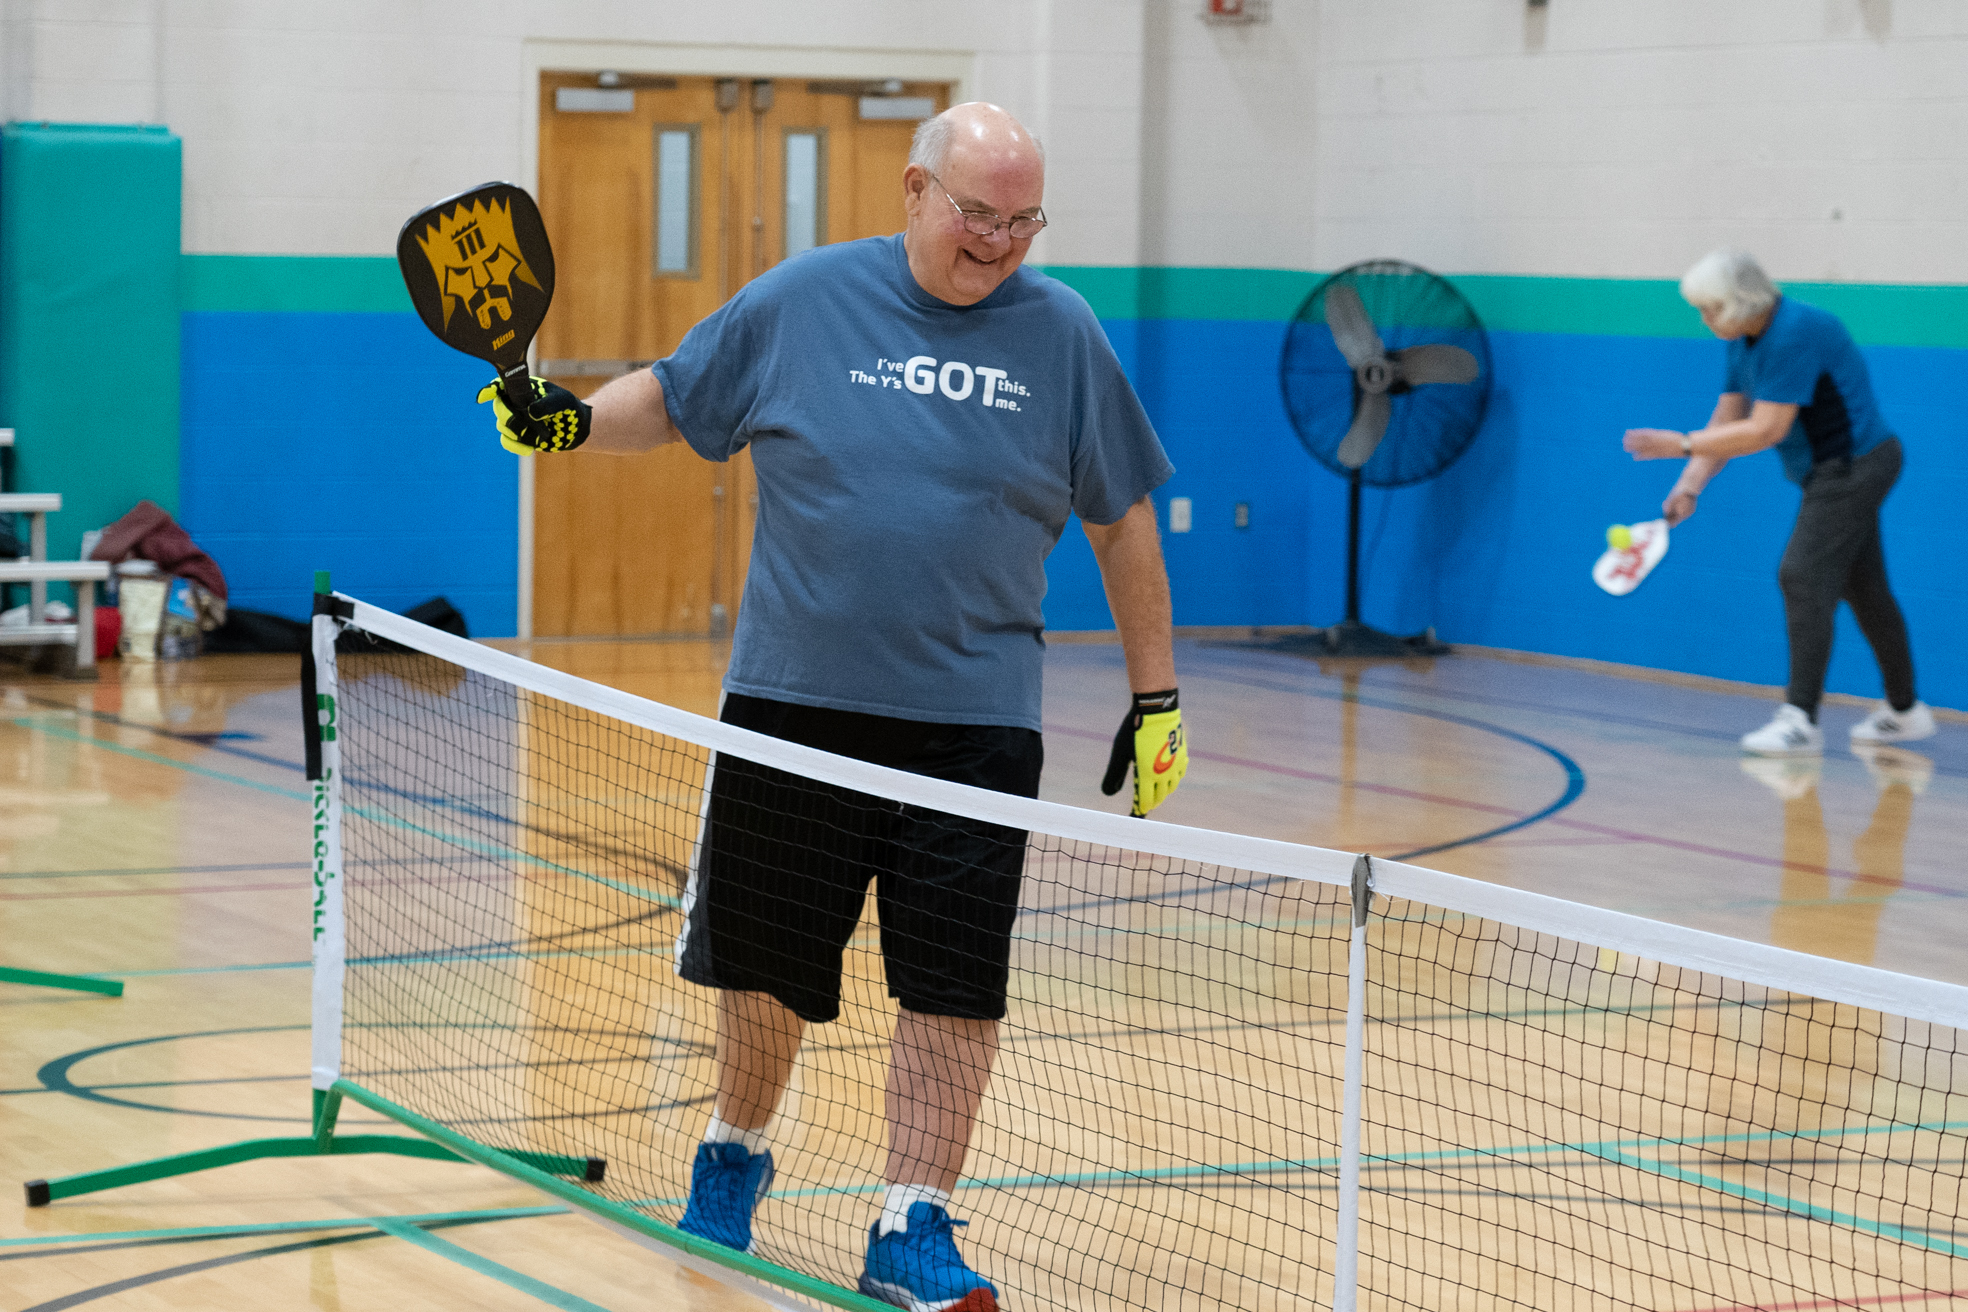 man smiling while playing pickleball at the gateway region ymca